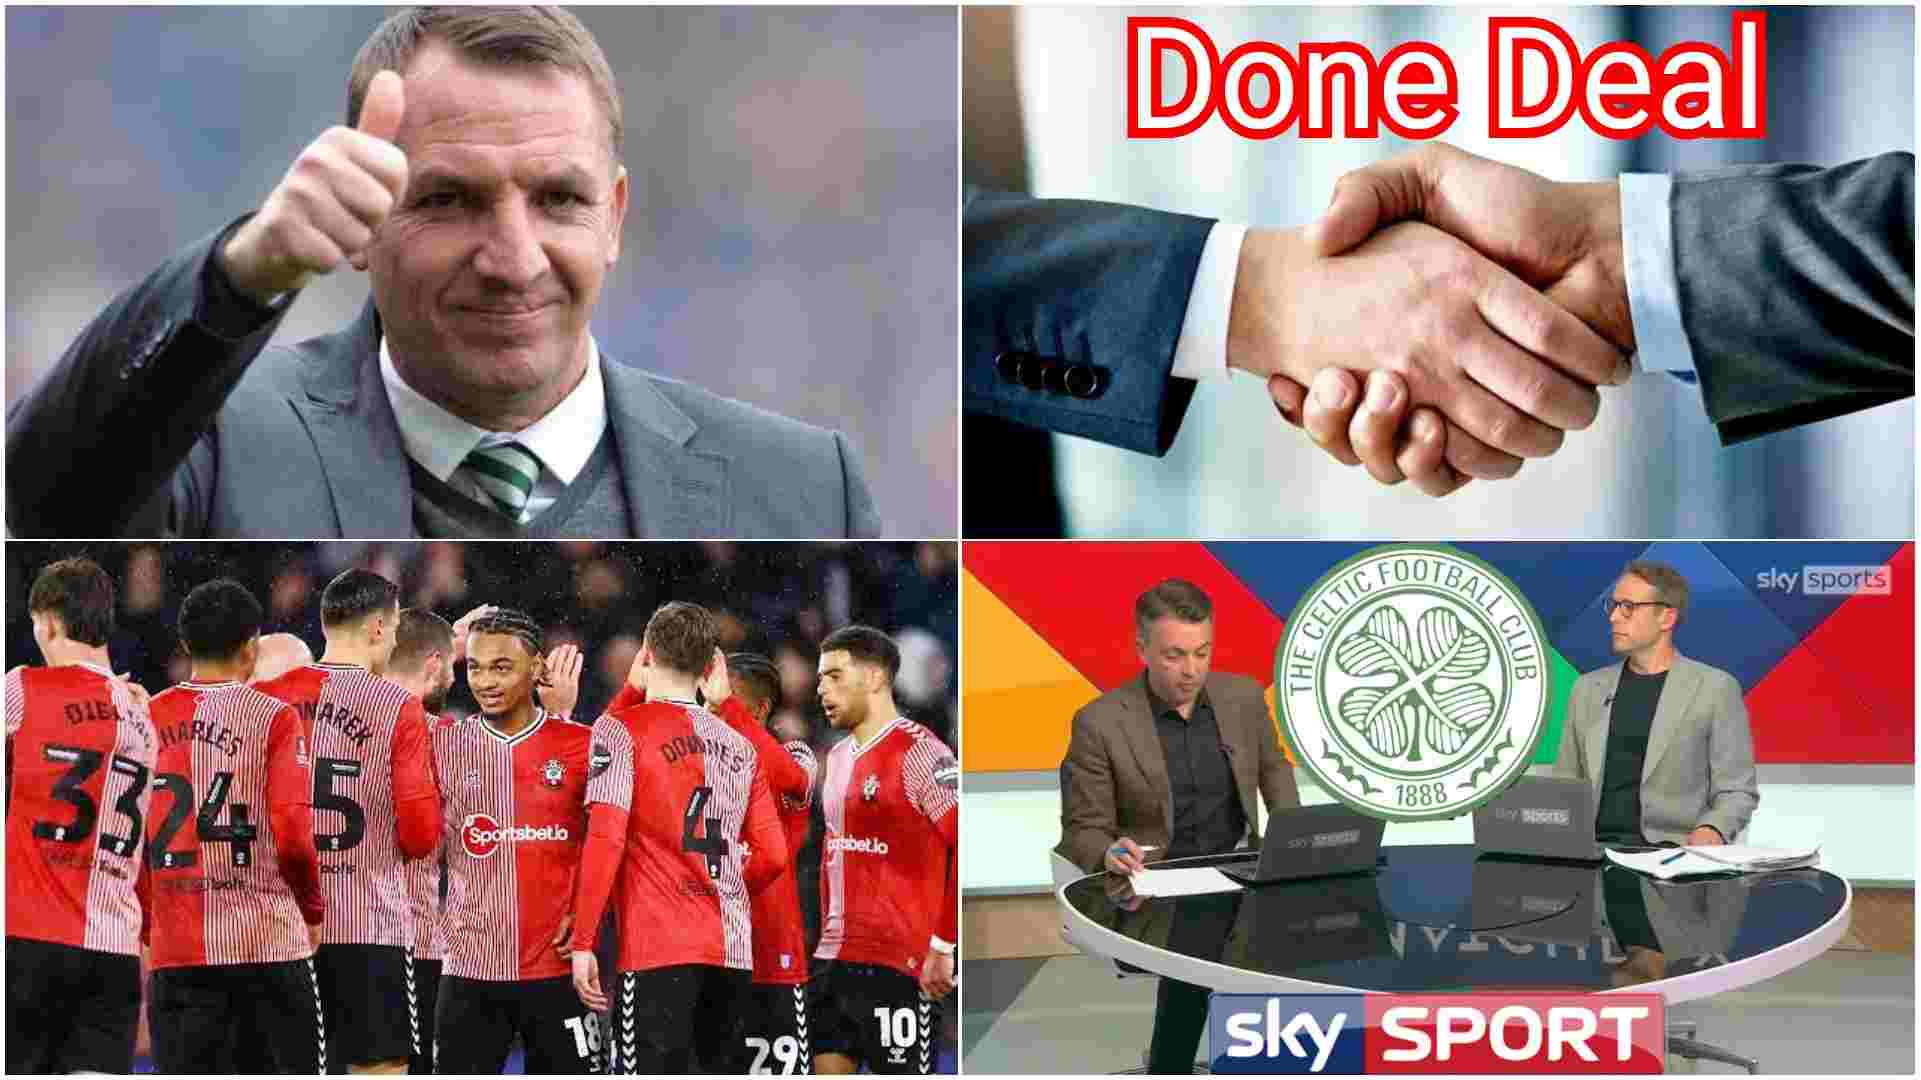 “Major Positive for Fans:” DONE DEAL – Celtic have struck an Agreement with Southampton for the SIGNING of Top-class man who brings wealth of experience to the club